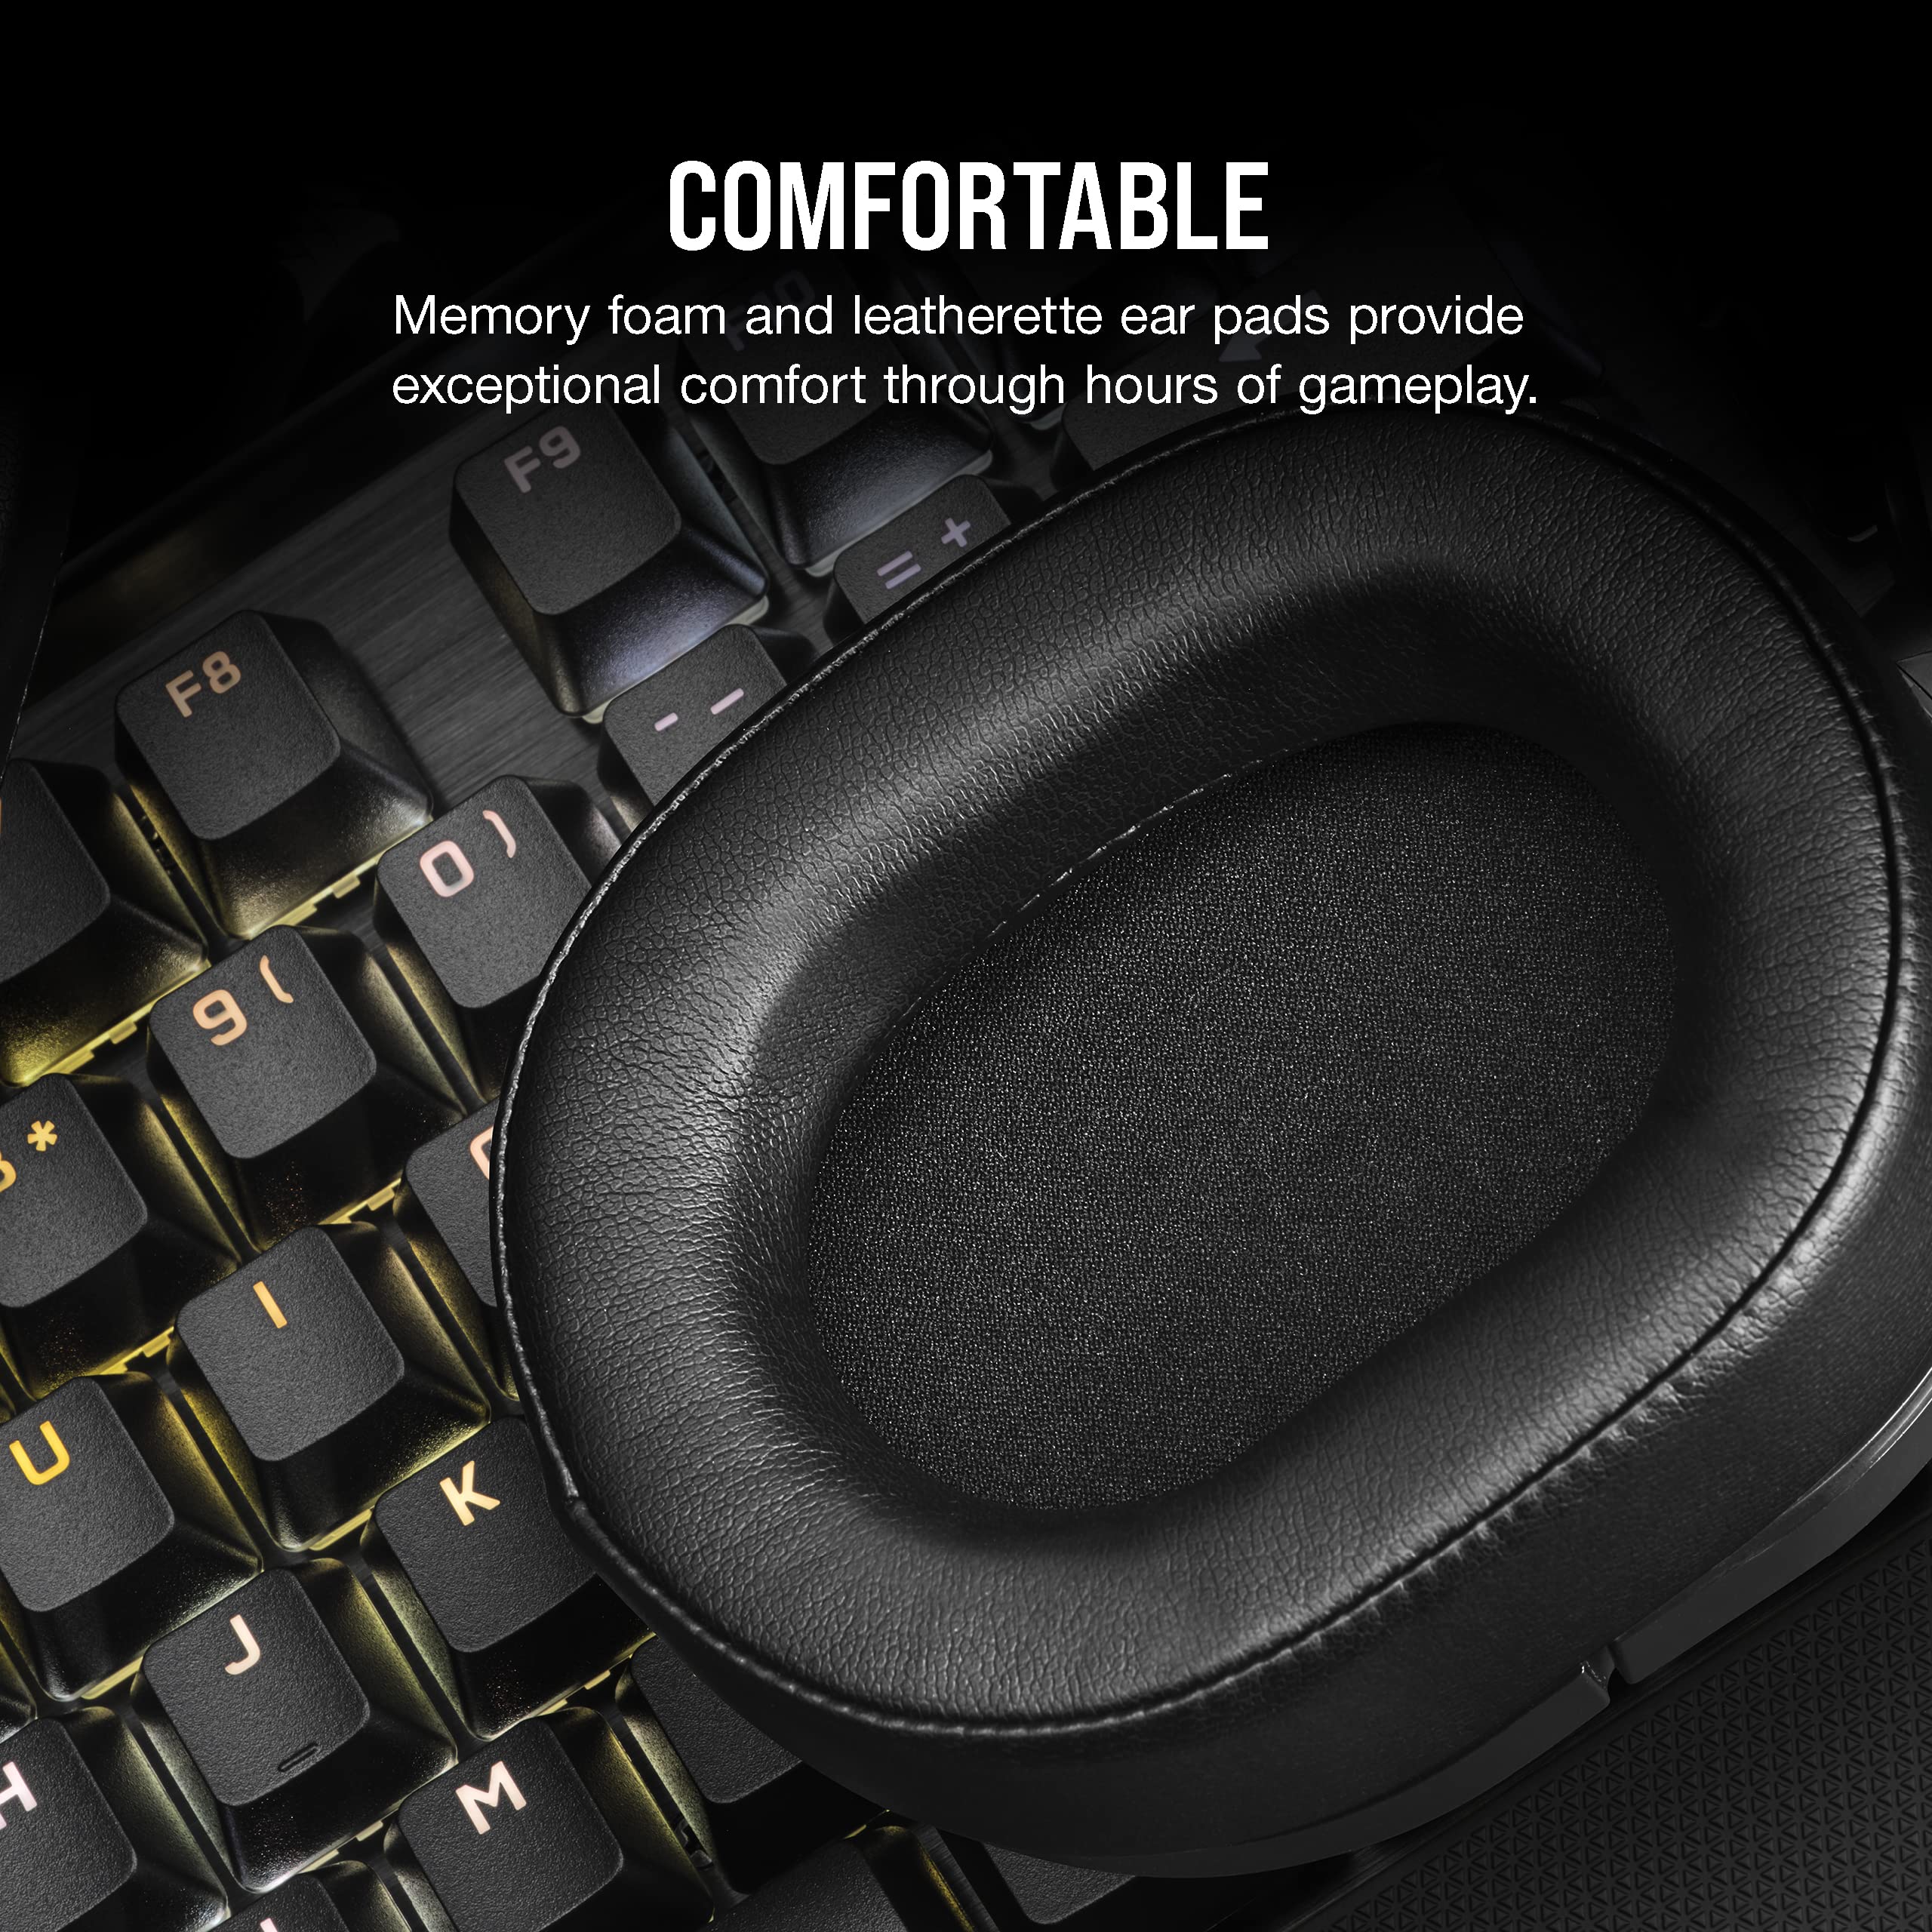 Corsair HS55 Wireless CORE Gaming Headset - Low-Latency 2.4Ghz, Up to 50ft Bluetooth Range, Lightweight Construction, Tempest 3D AudioTech Support on PS5, Omni-Directional Microphone - Black